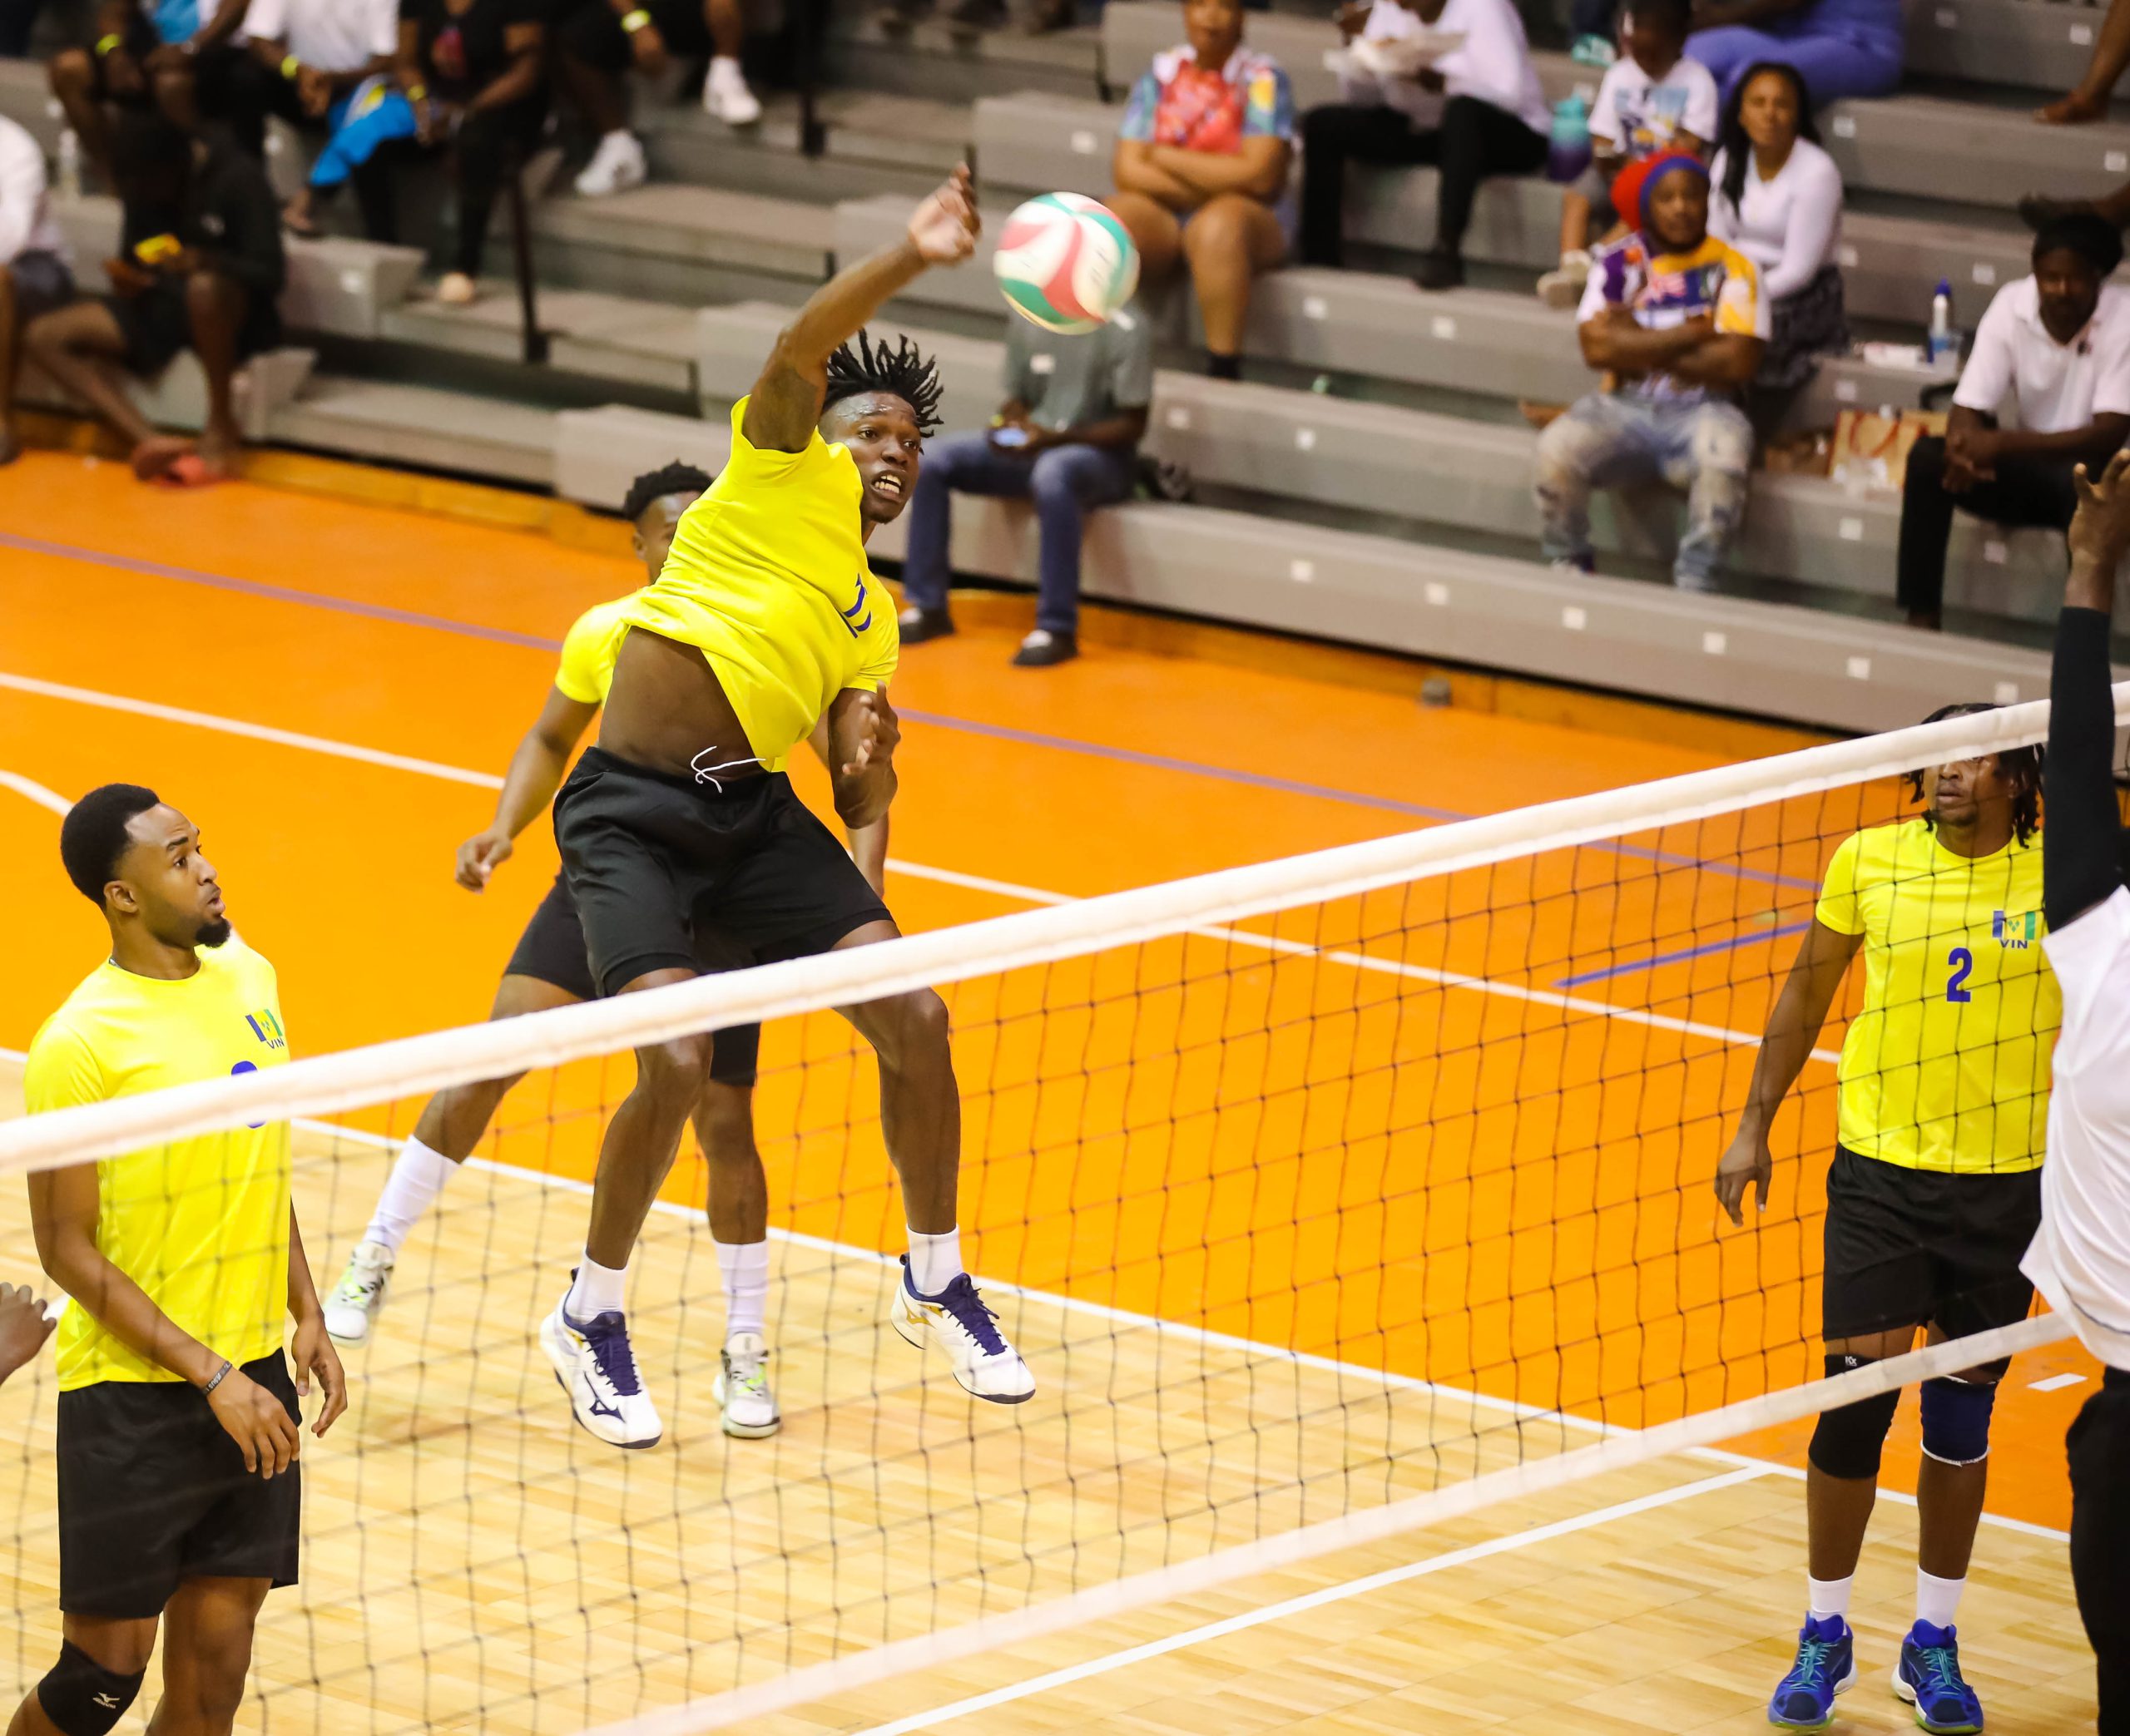 St. Vincent and the Grenadines win ‘thriller in Tortola’